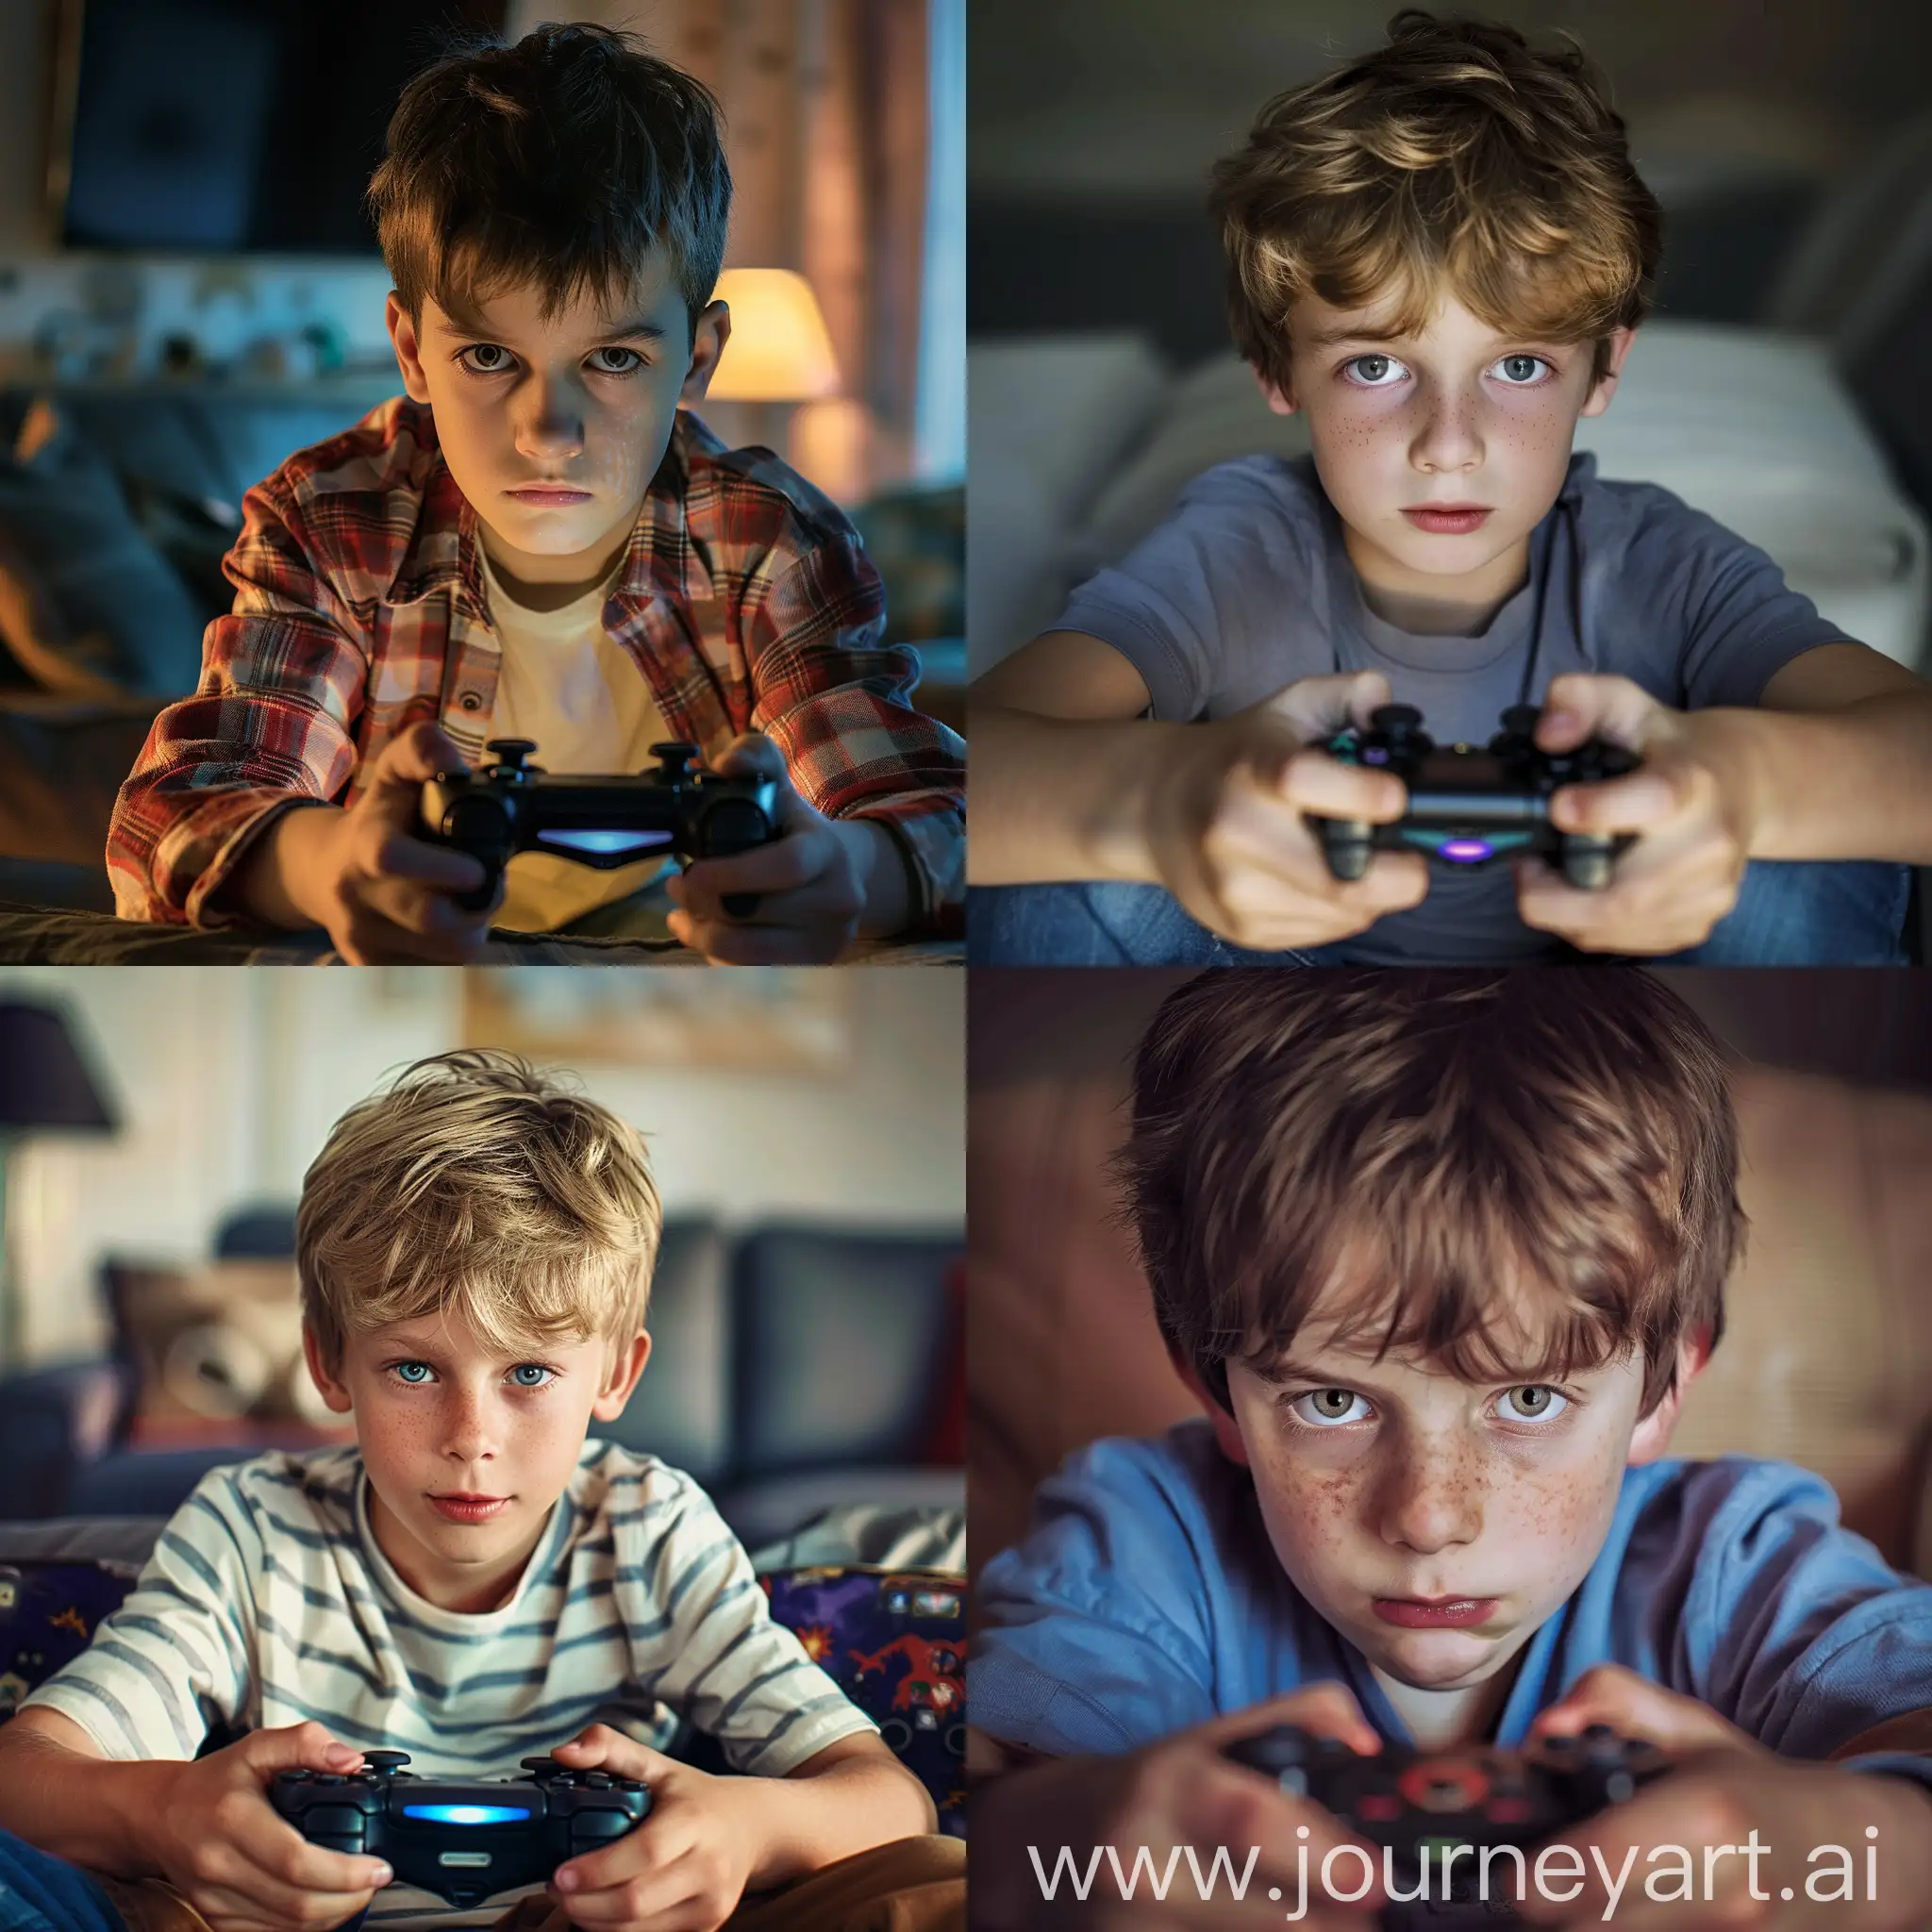 Young-Boy-Engrossed-in-Video-Game-Fun